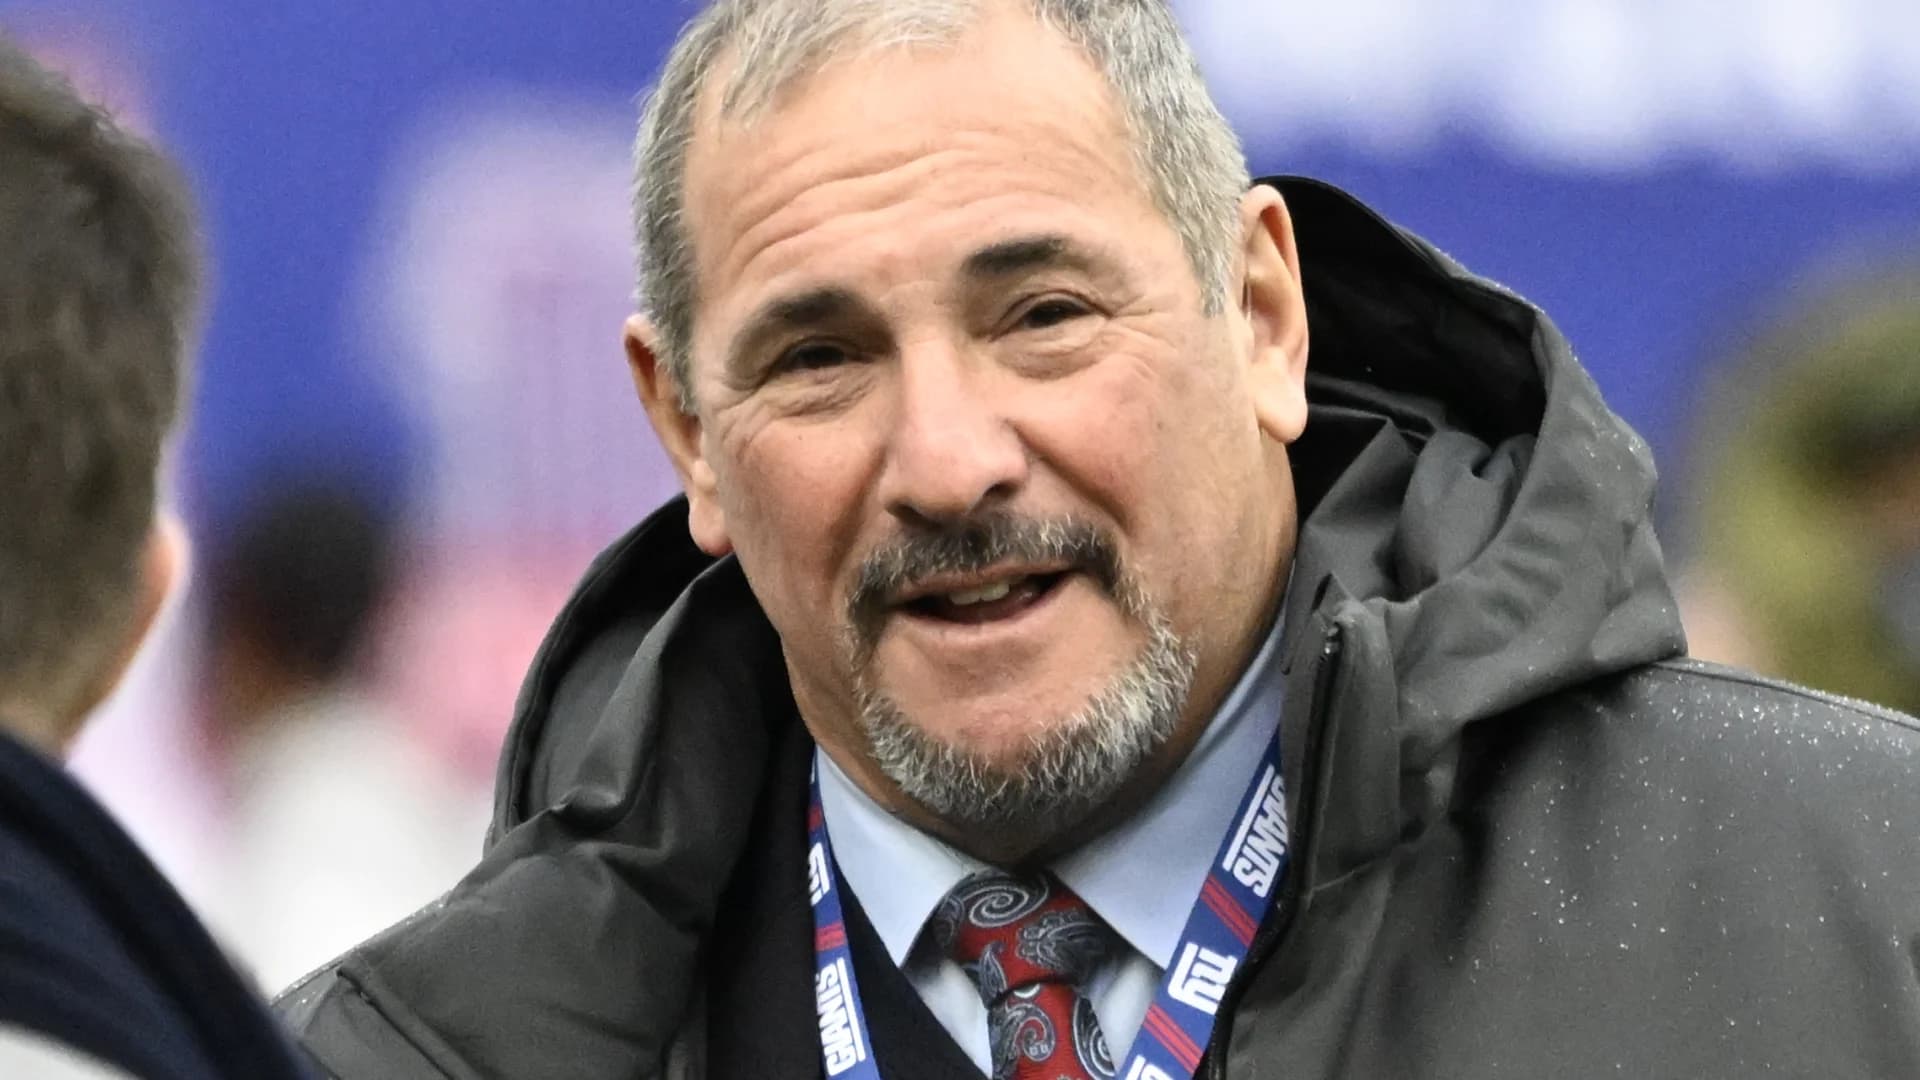 Dave Gettleman out as Giants GM, says he is retiring